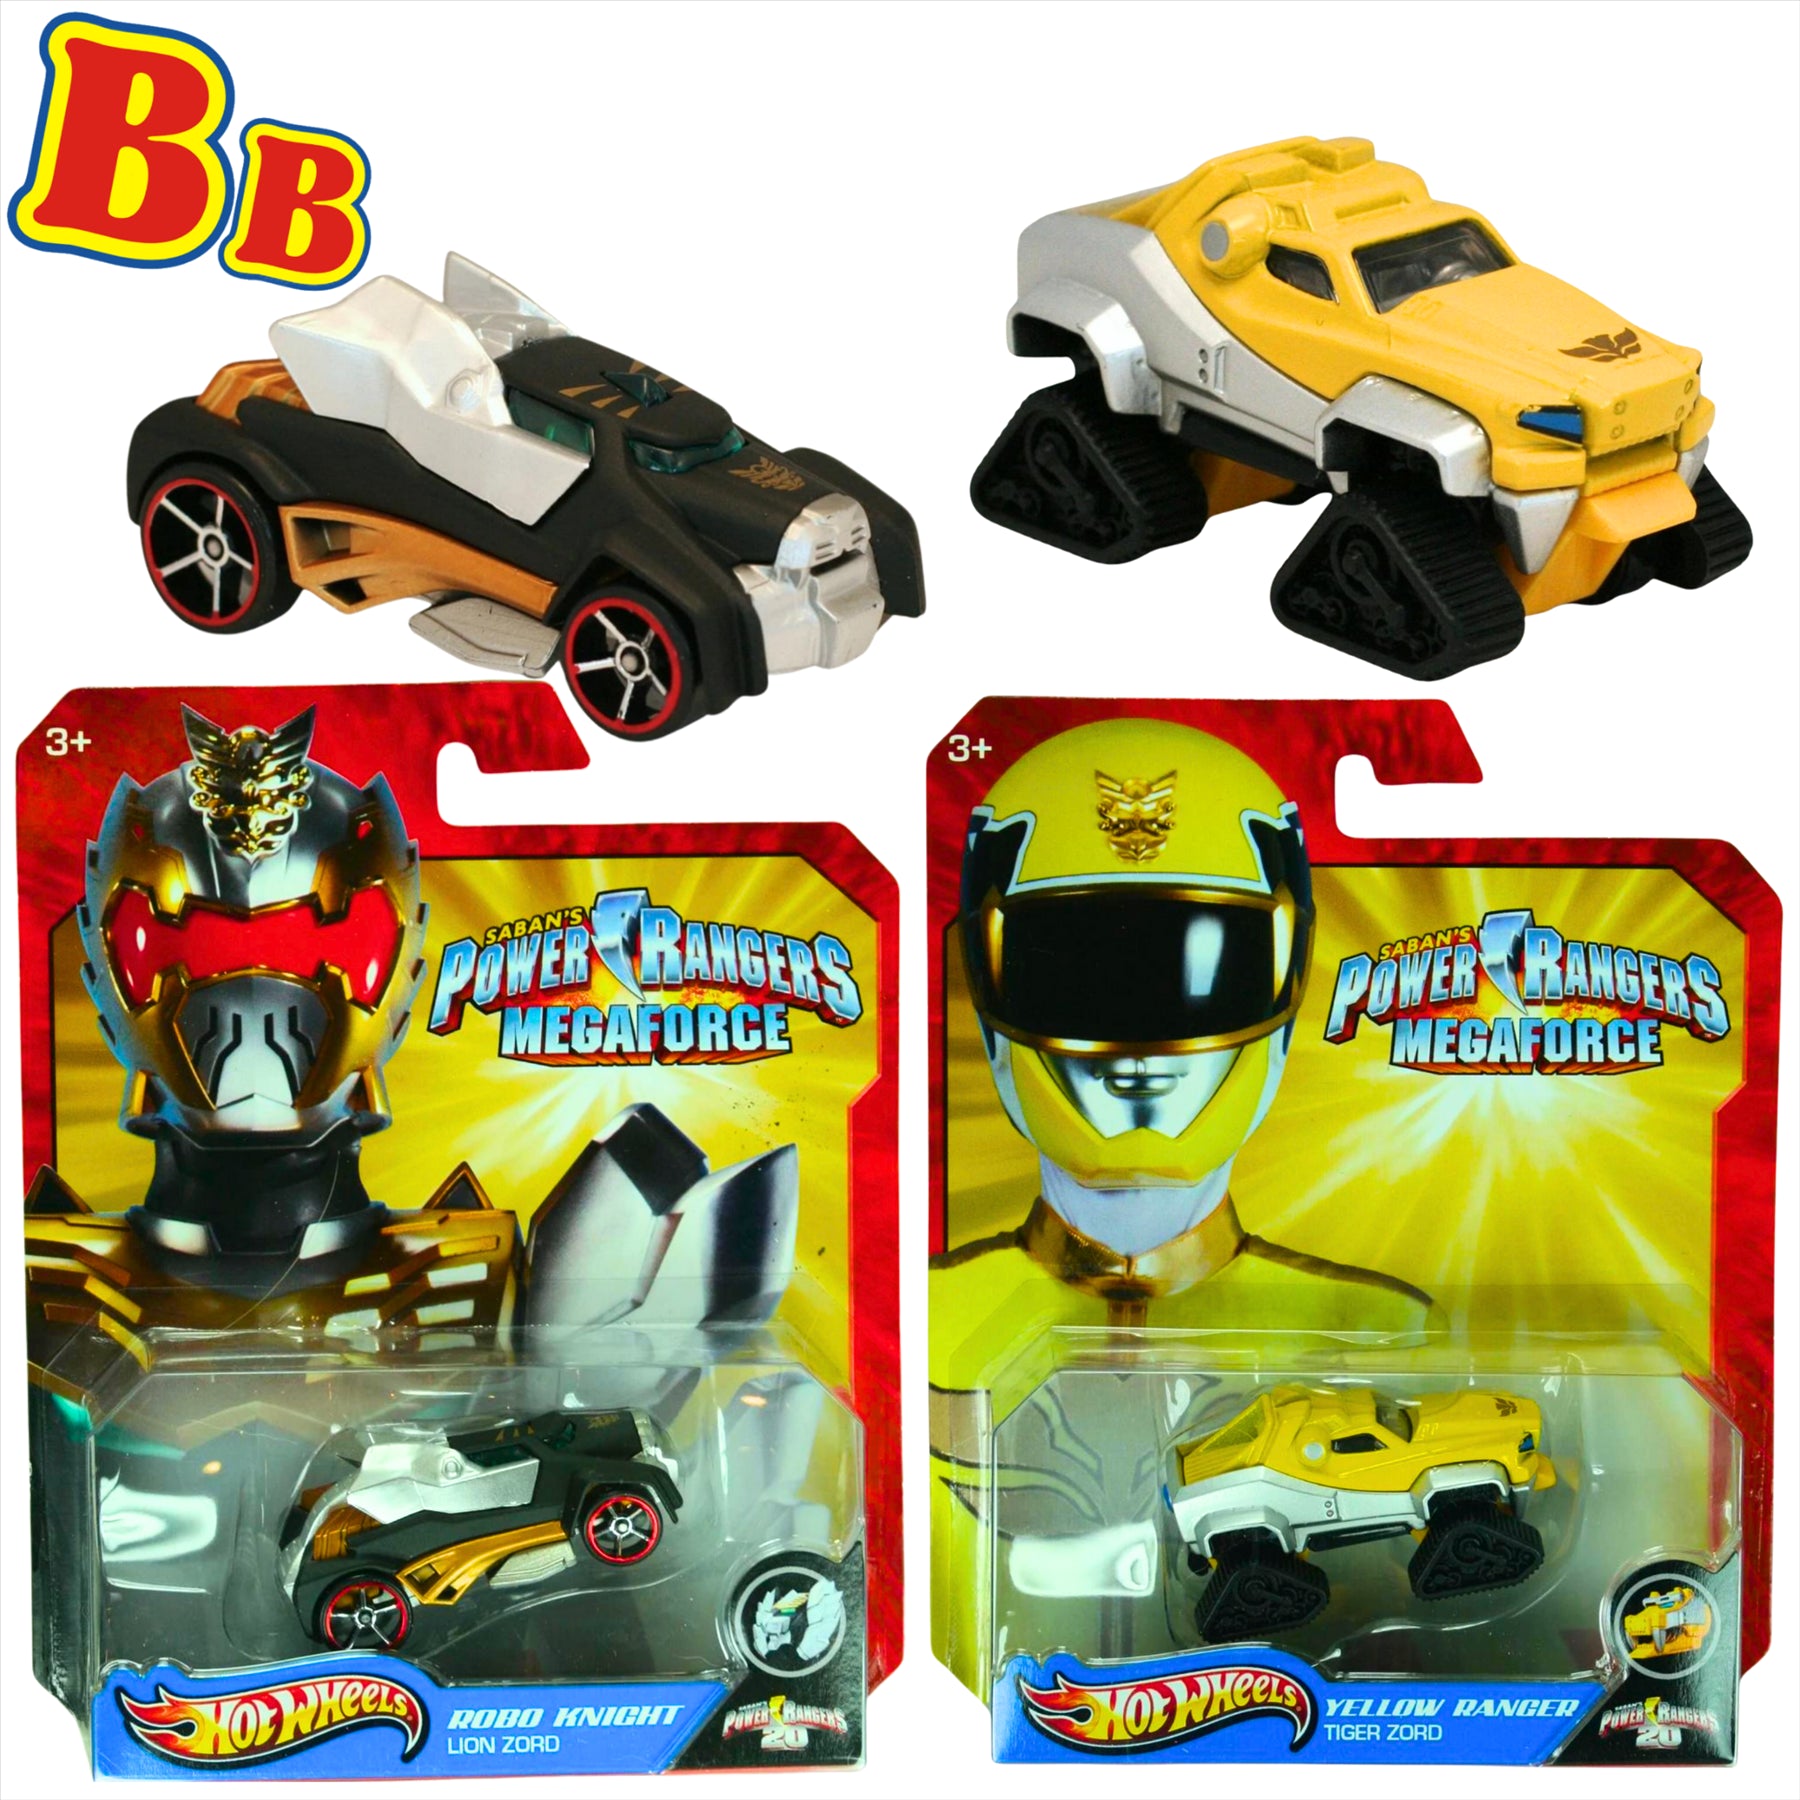 Hot Wheels Power Rangers MegaForce Robo Knight Lion Zord and Yellow Ranger Tiger Zord - Twin Pack - Toptoys2u